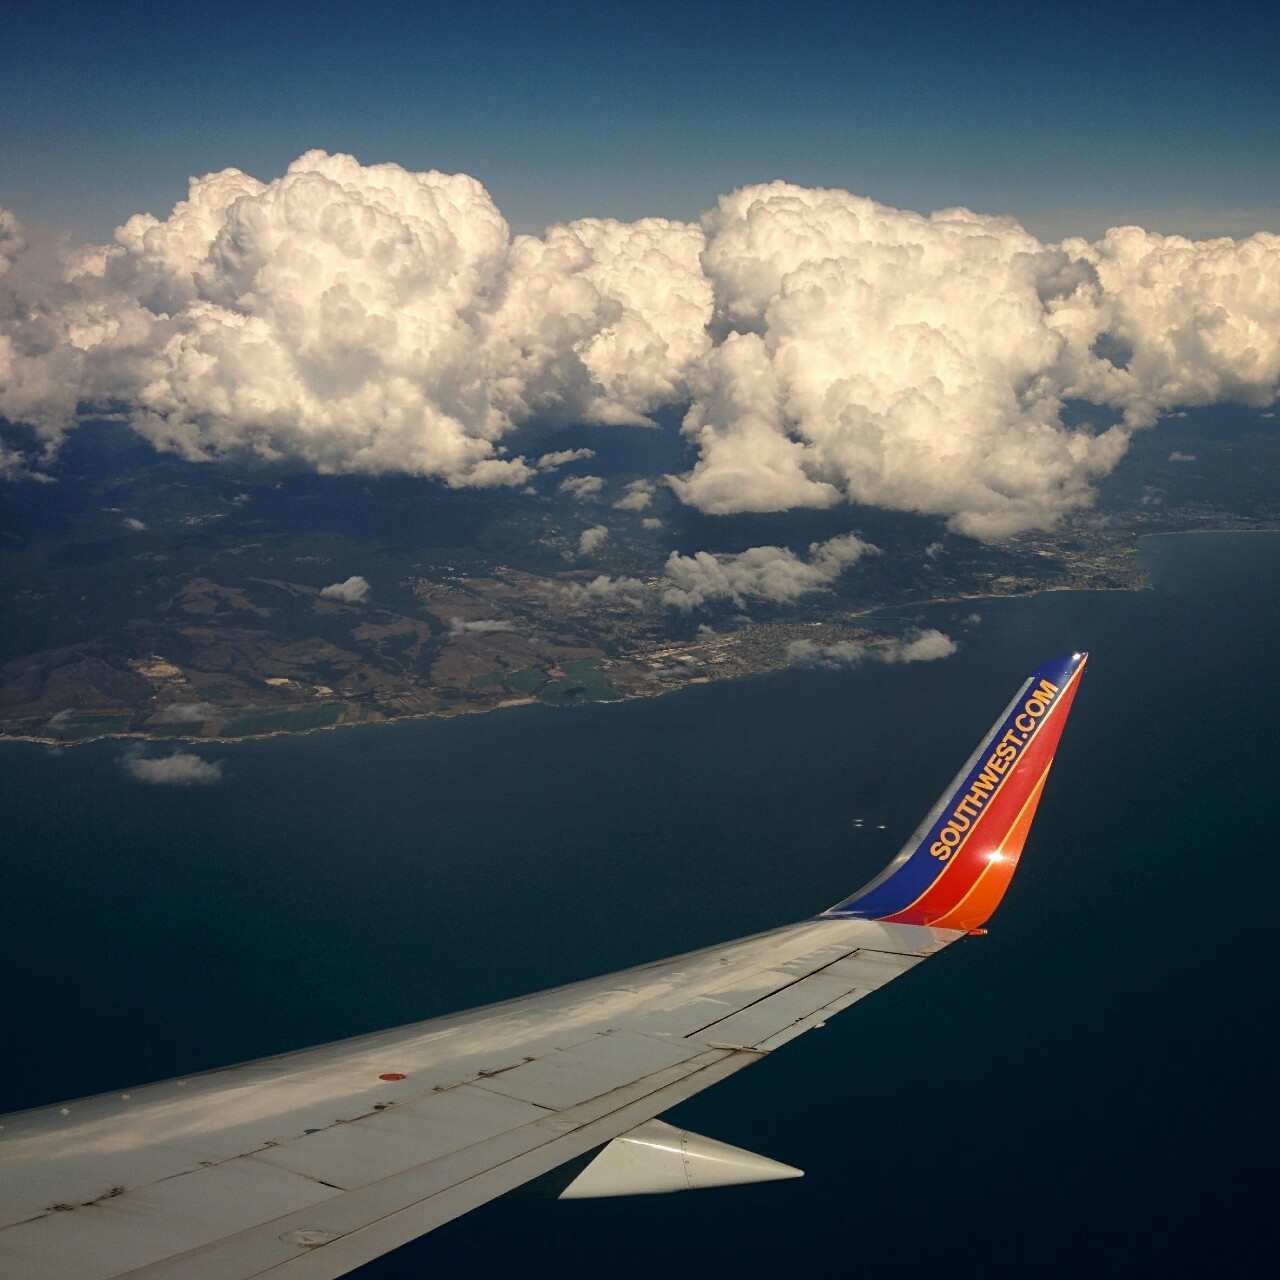 Awesome views coming into the bay area today. That SAN-SFO leg rocked!